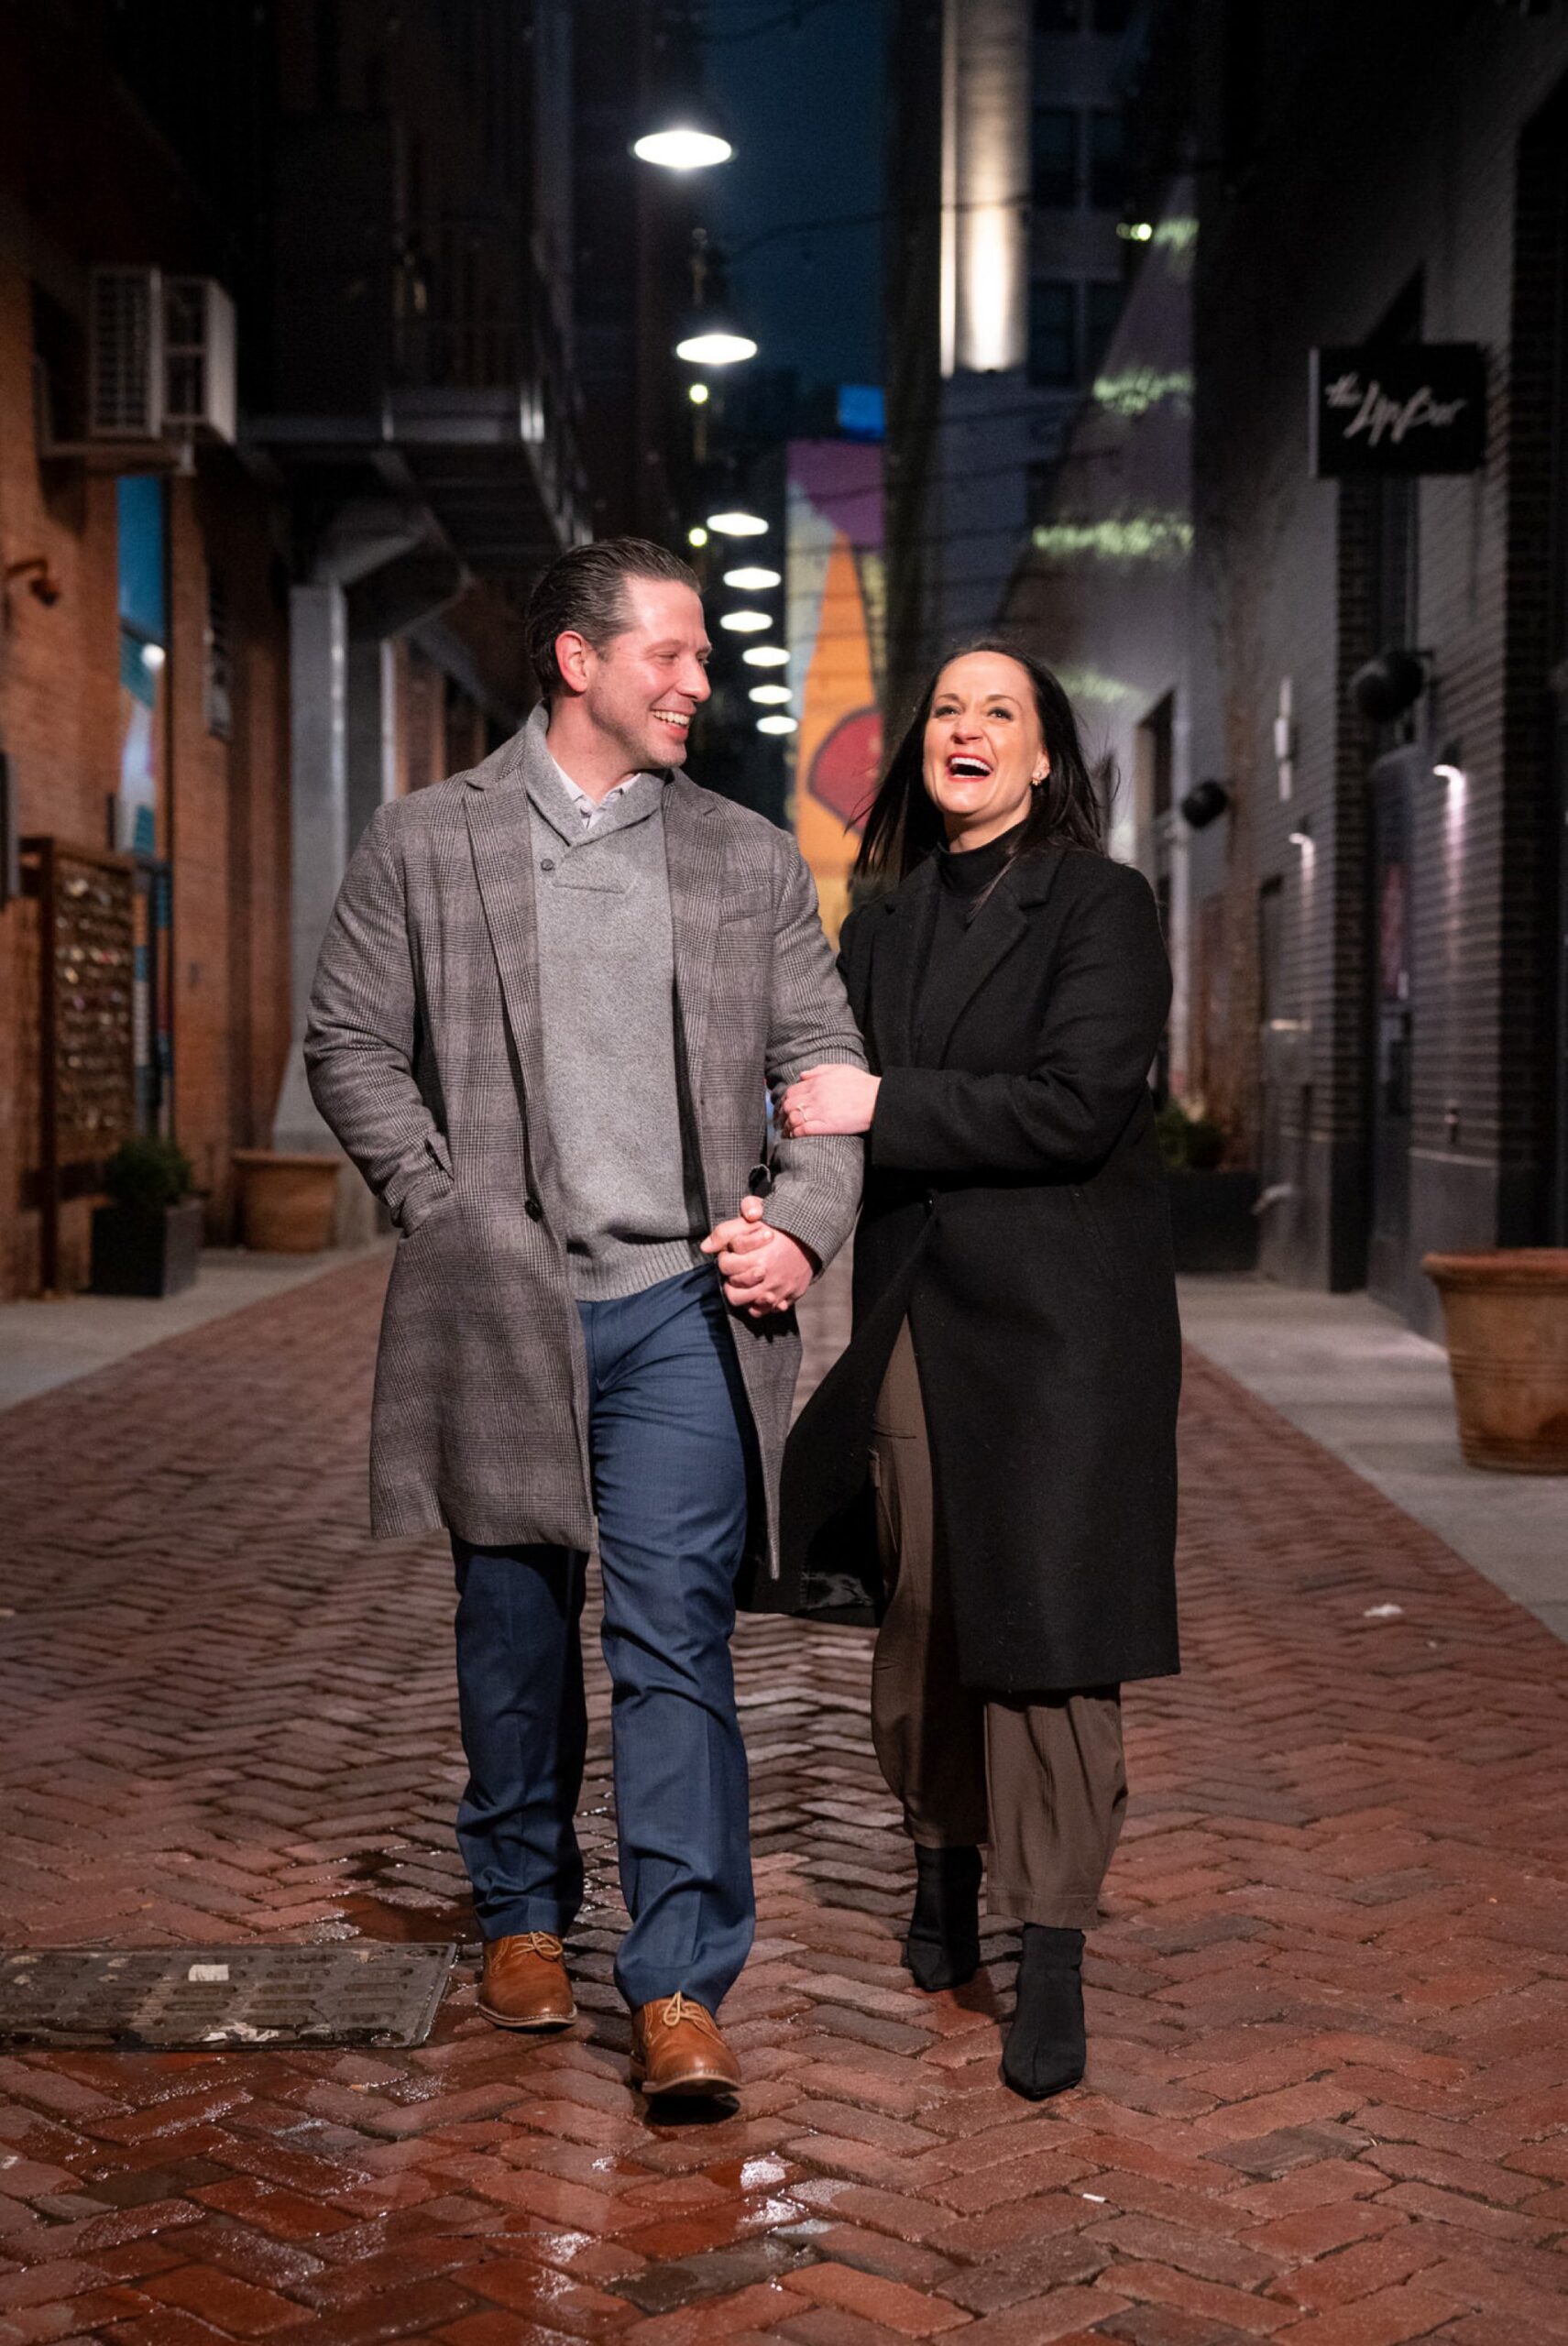 A newly engaged couple walks away after a proposal in Parker's Alley.